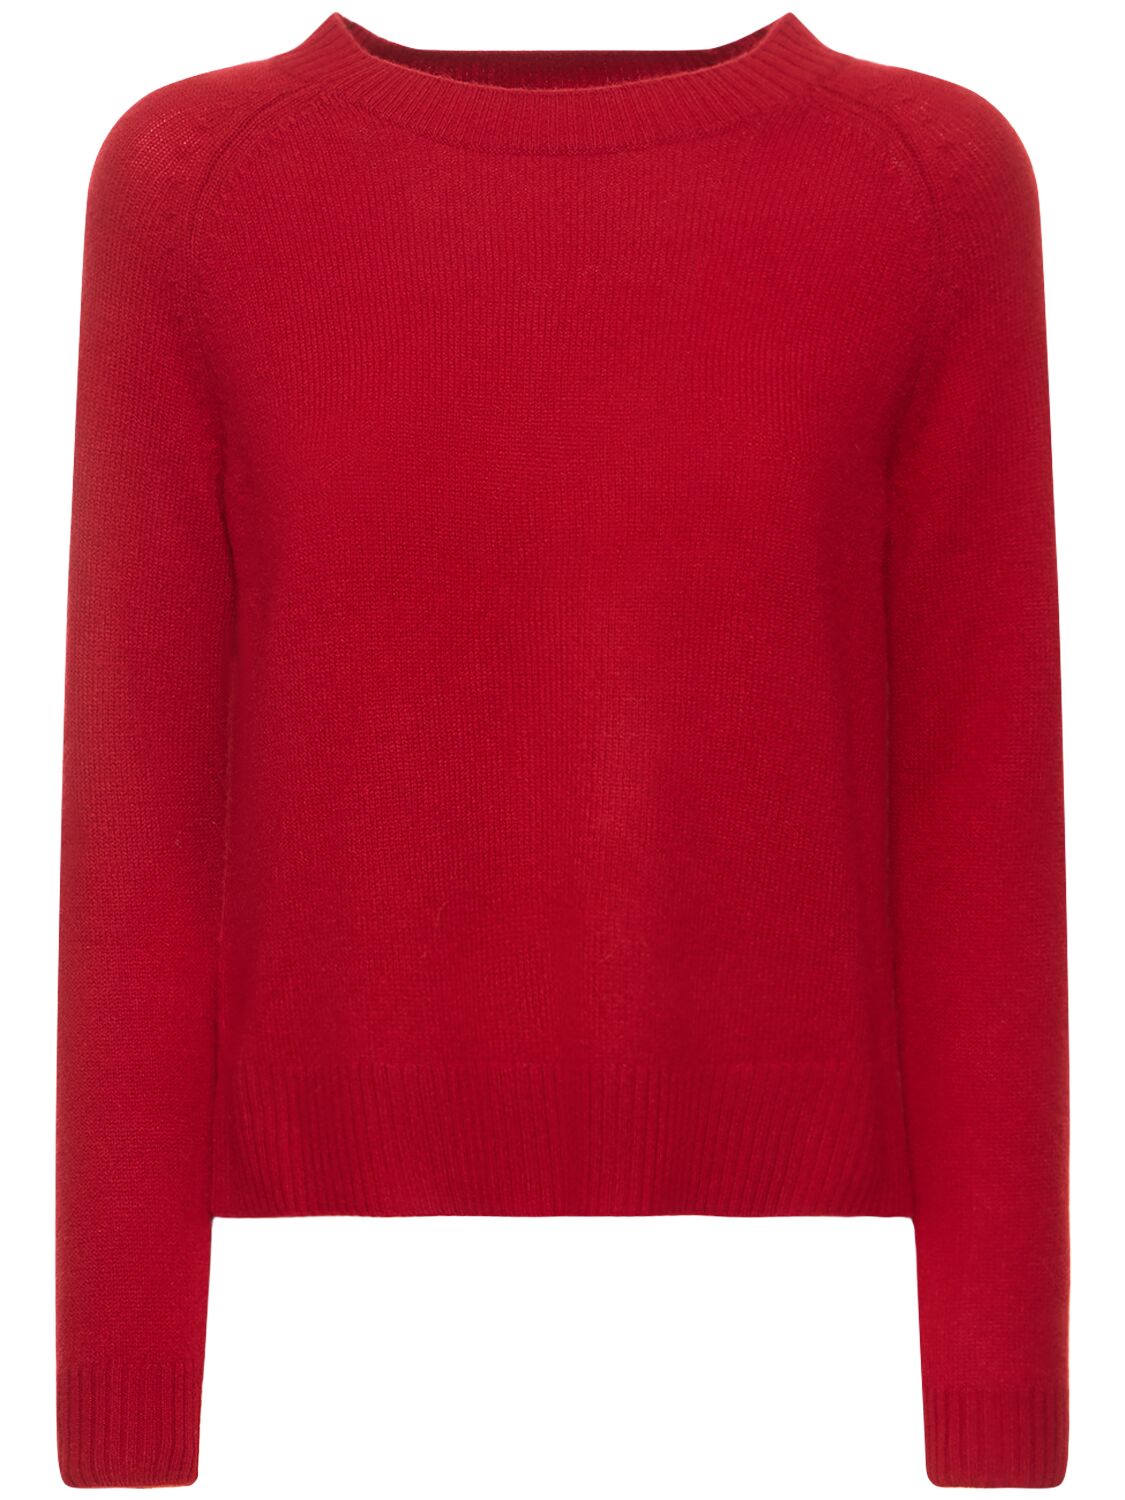 Weekend Max Mara Scatola Cashmere Knit Jumper In Red